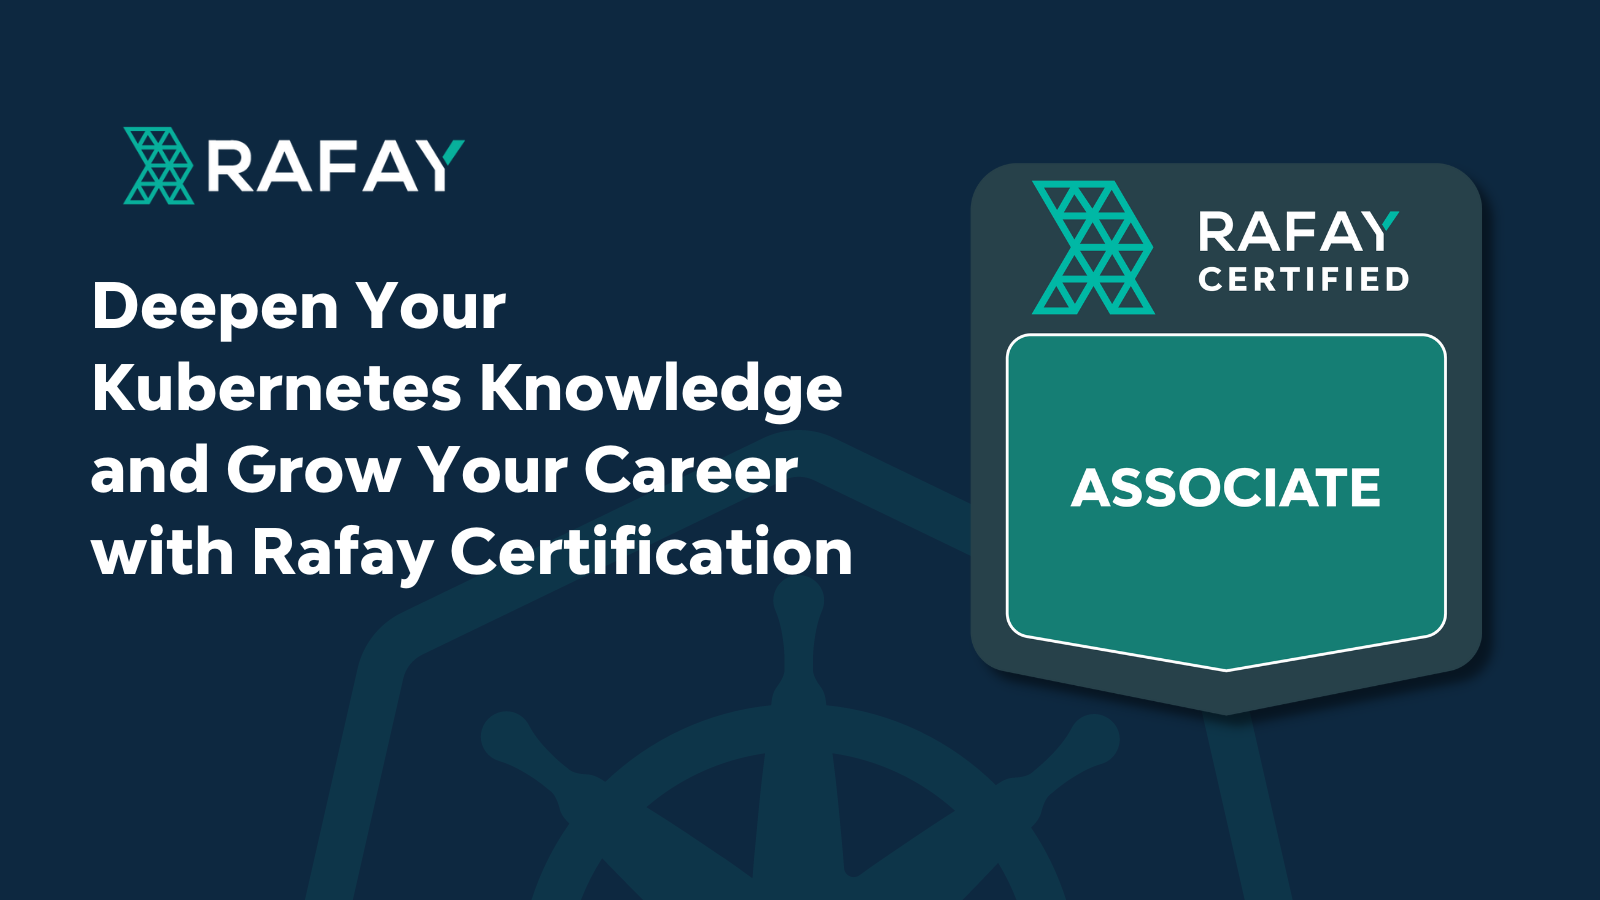 Image for Deepen Your Kubernetes Knowledge and Grow Your Career with Rafay Certification